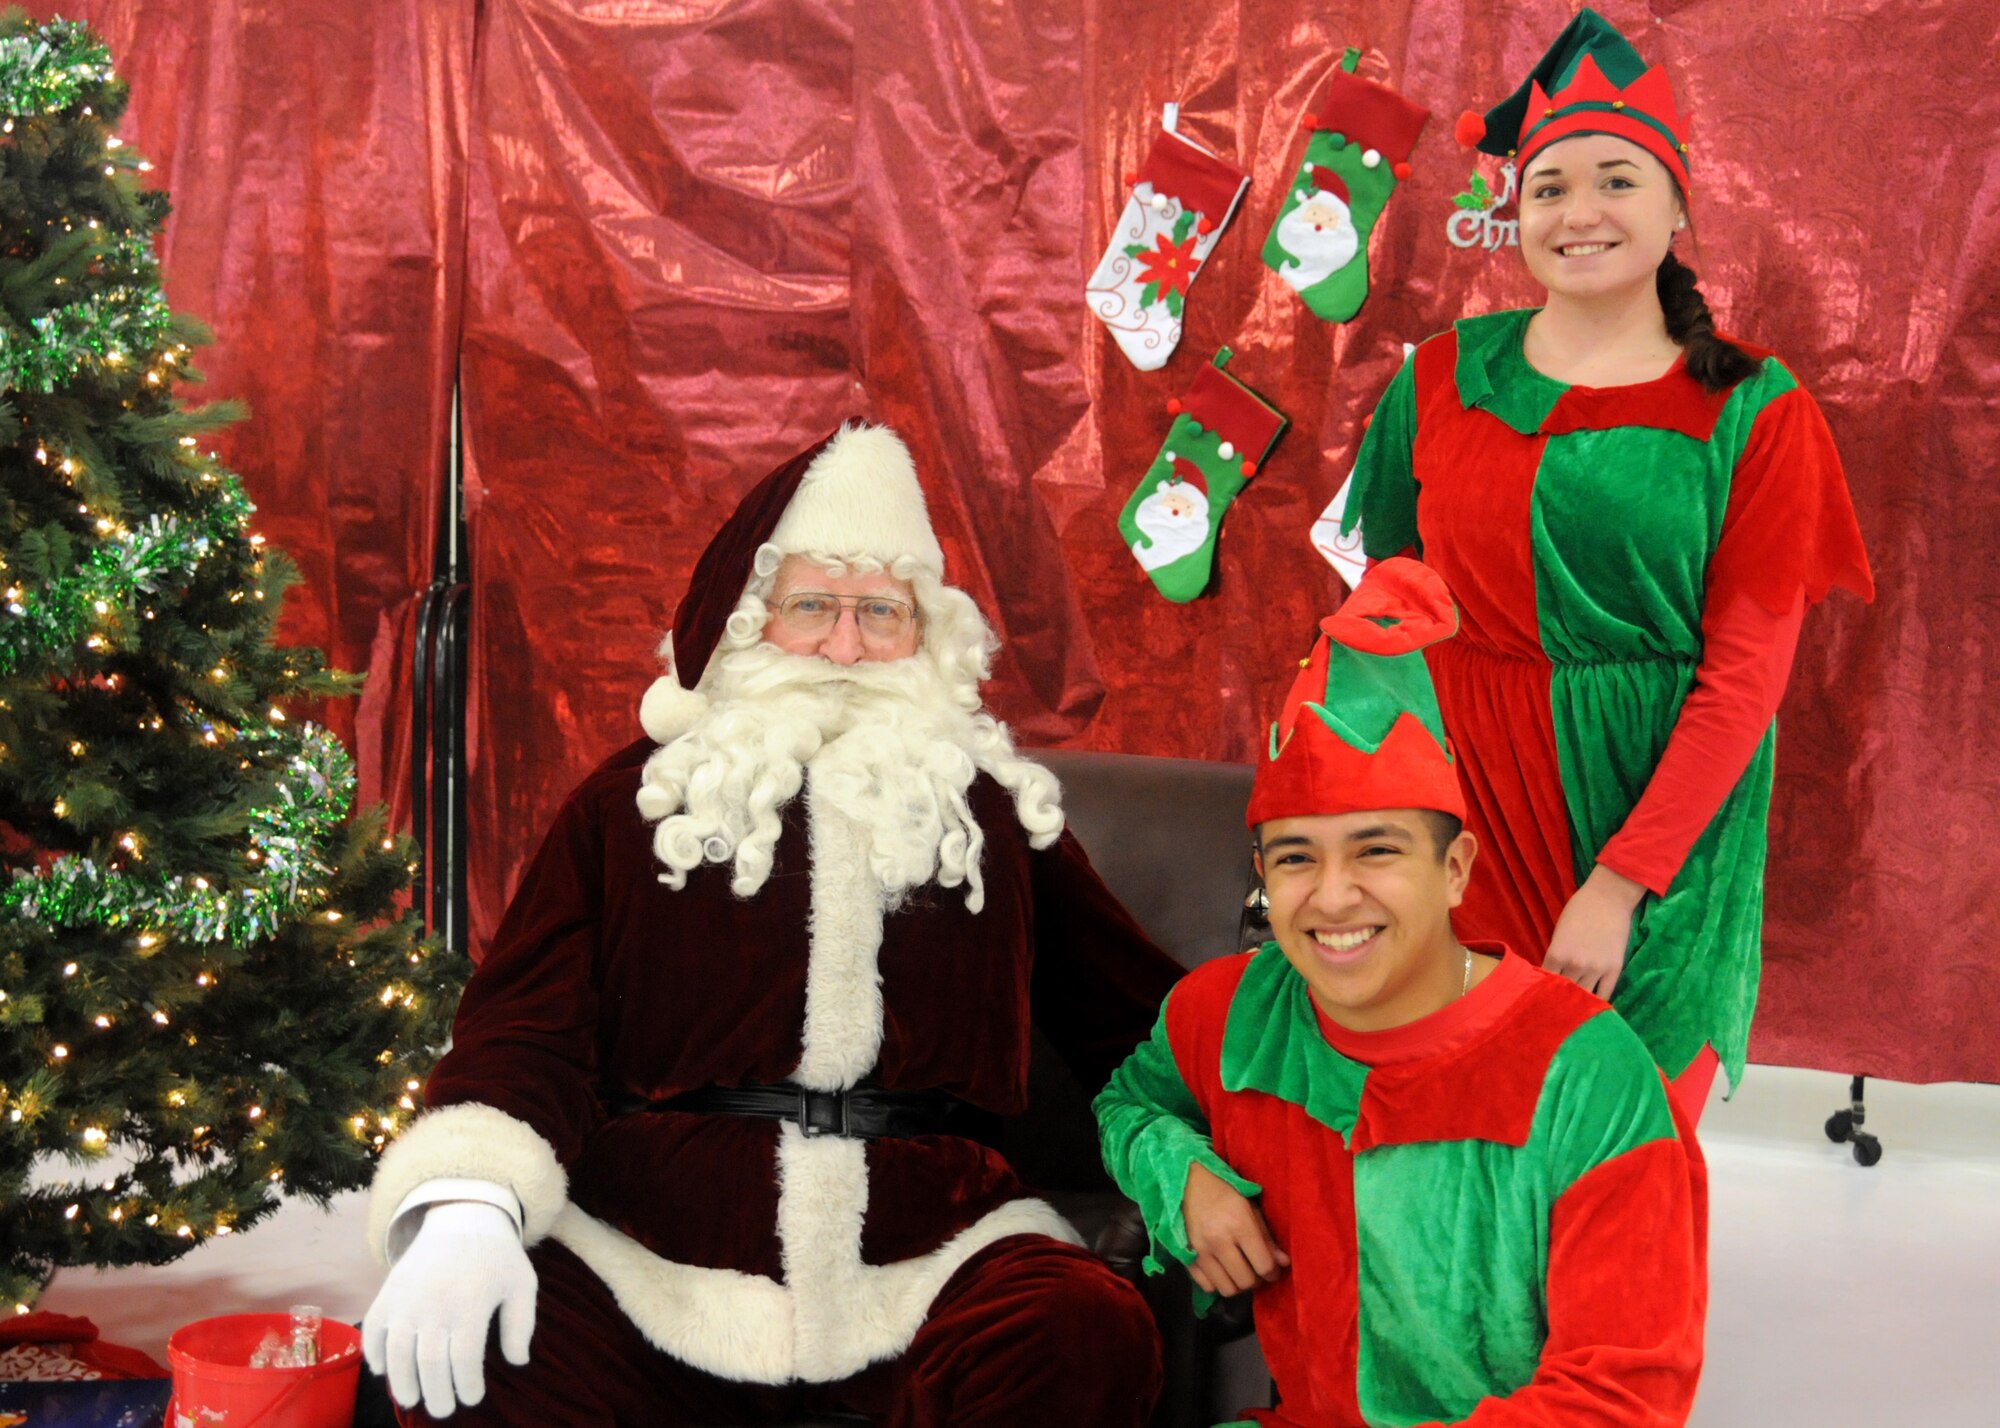 Victoria Fillipi, a member of the Iowa Guard Youth Council and Staff Sgt. Damian Huizar, a services Airmen assigned to the 185th Air Refueling Wing, pose for a photo with Santa at Sioux City Iowa, Dec. 3, 2016. Children got the opportunity to take their photo with Santa and play games as a part of Operation Santa’s Sleigh. (Iowa Air National Guard photo by Staff Sgt. Ter Haar/Released) 